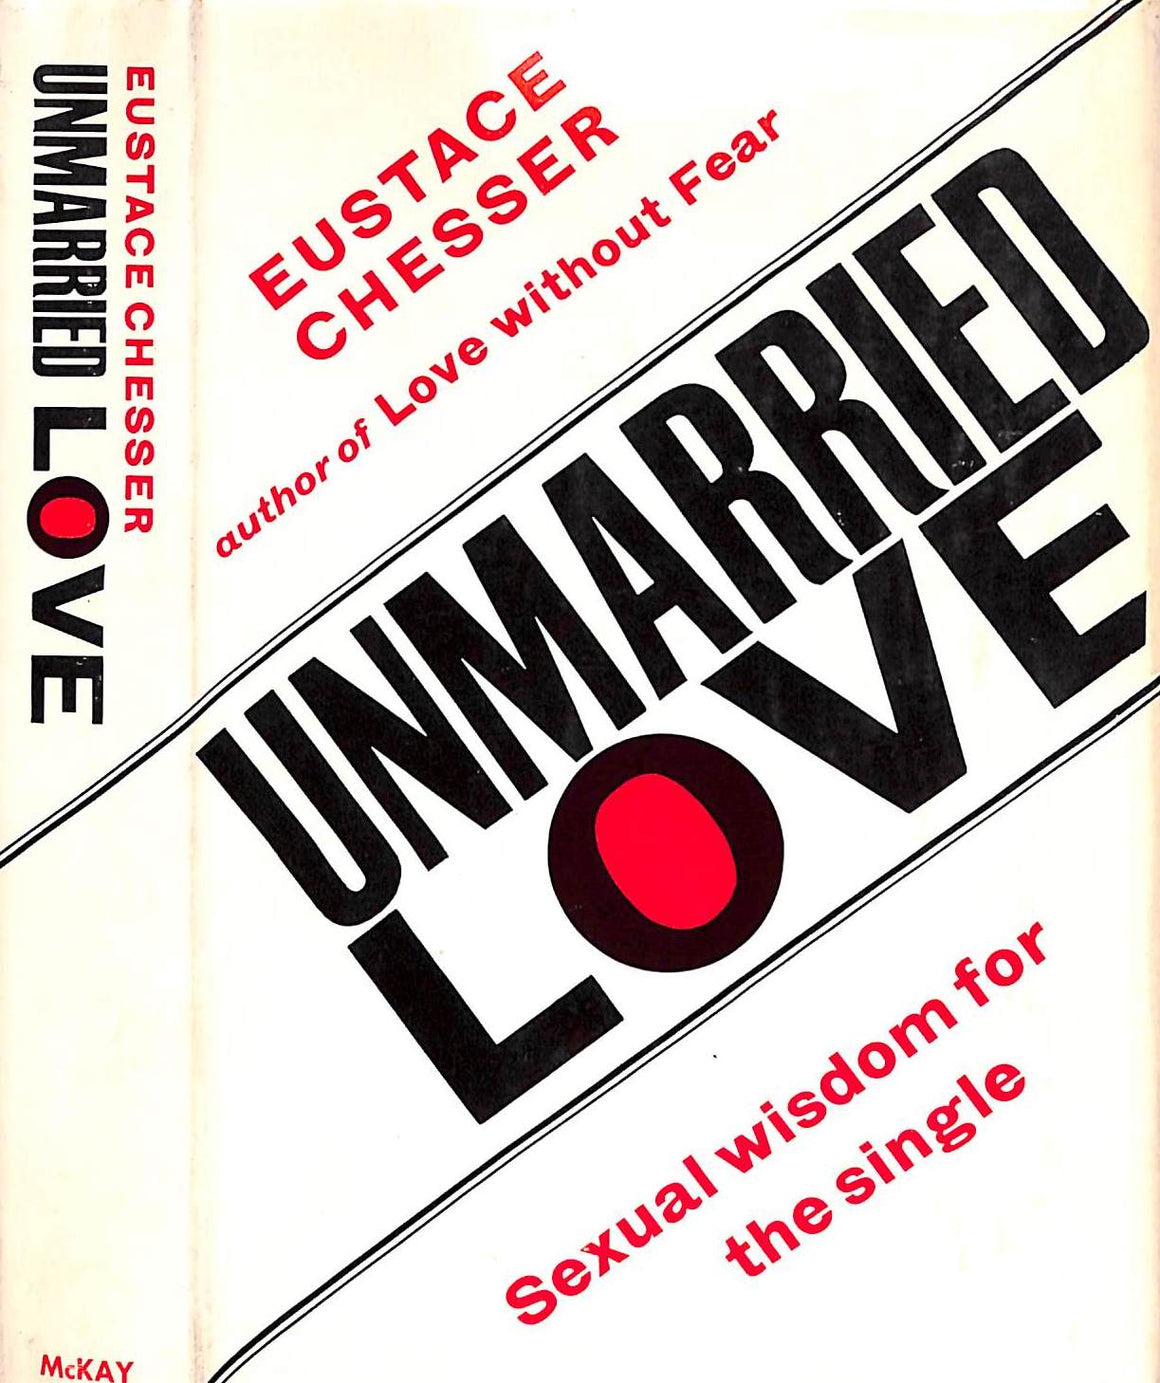 "Unmarried Love Sexual Wisdom For The Single" 1965 CHESSER, Eustace